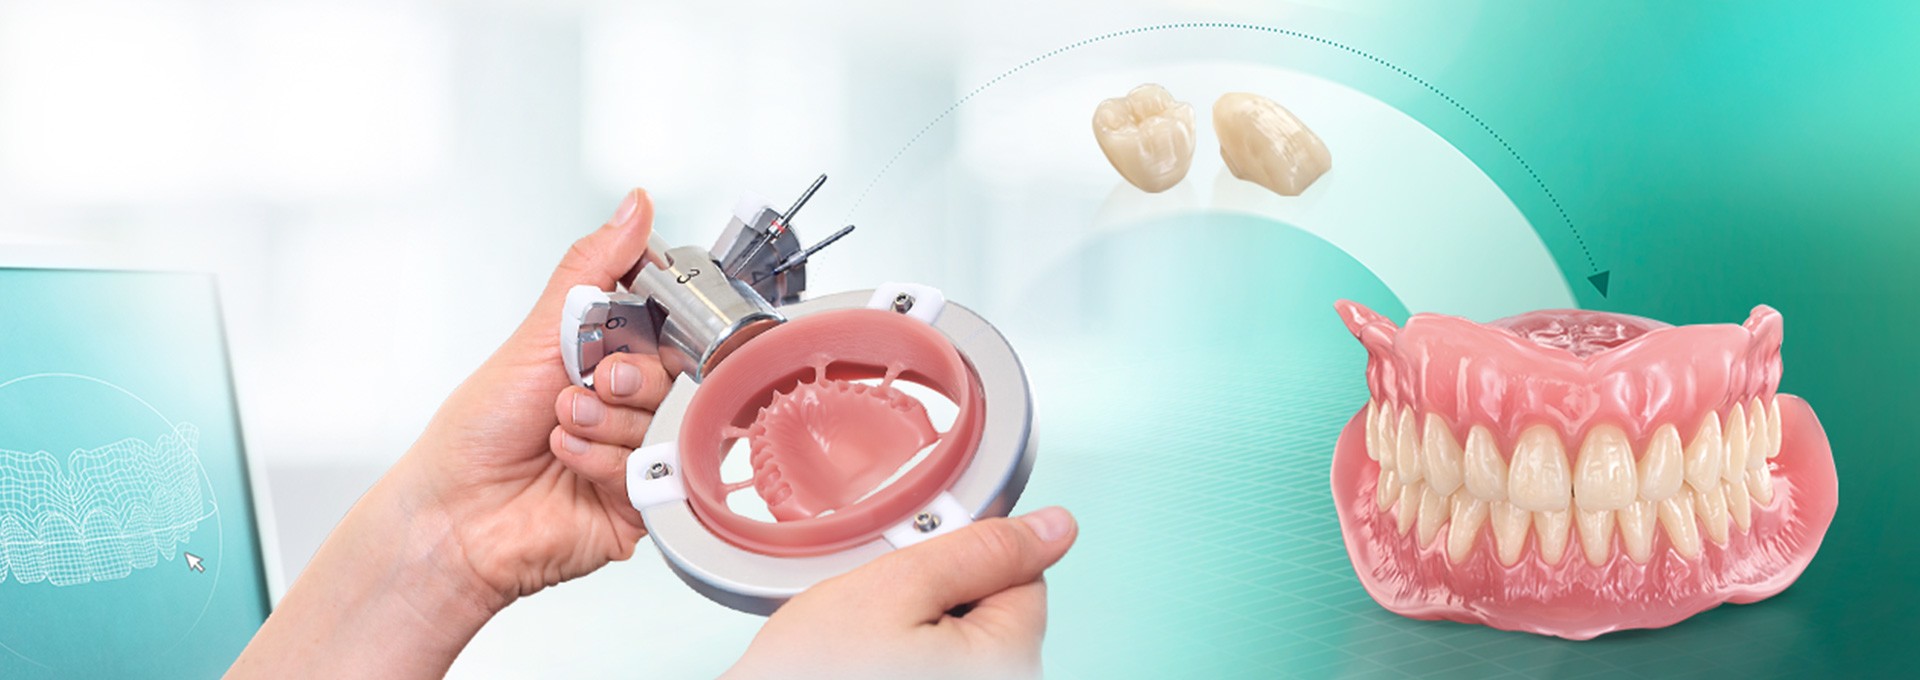 A digitally fabricated denture base and a full denture made of VITA VIONIC material